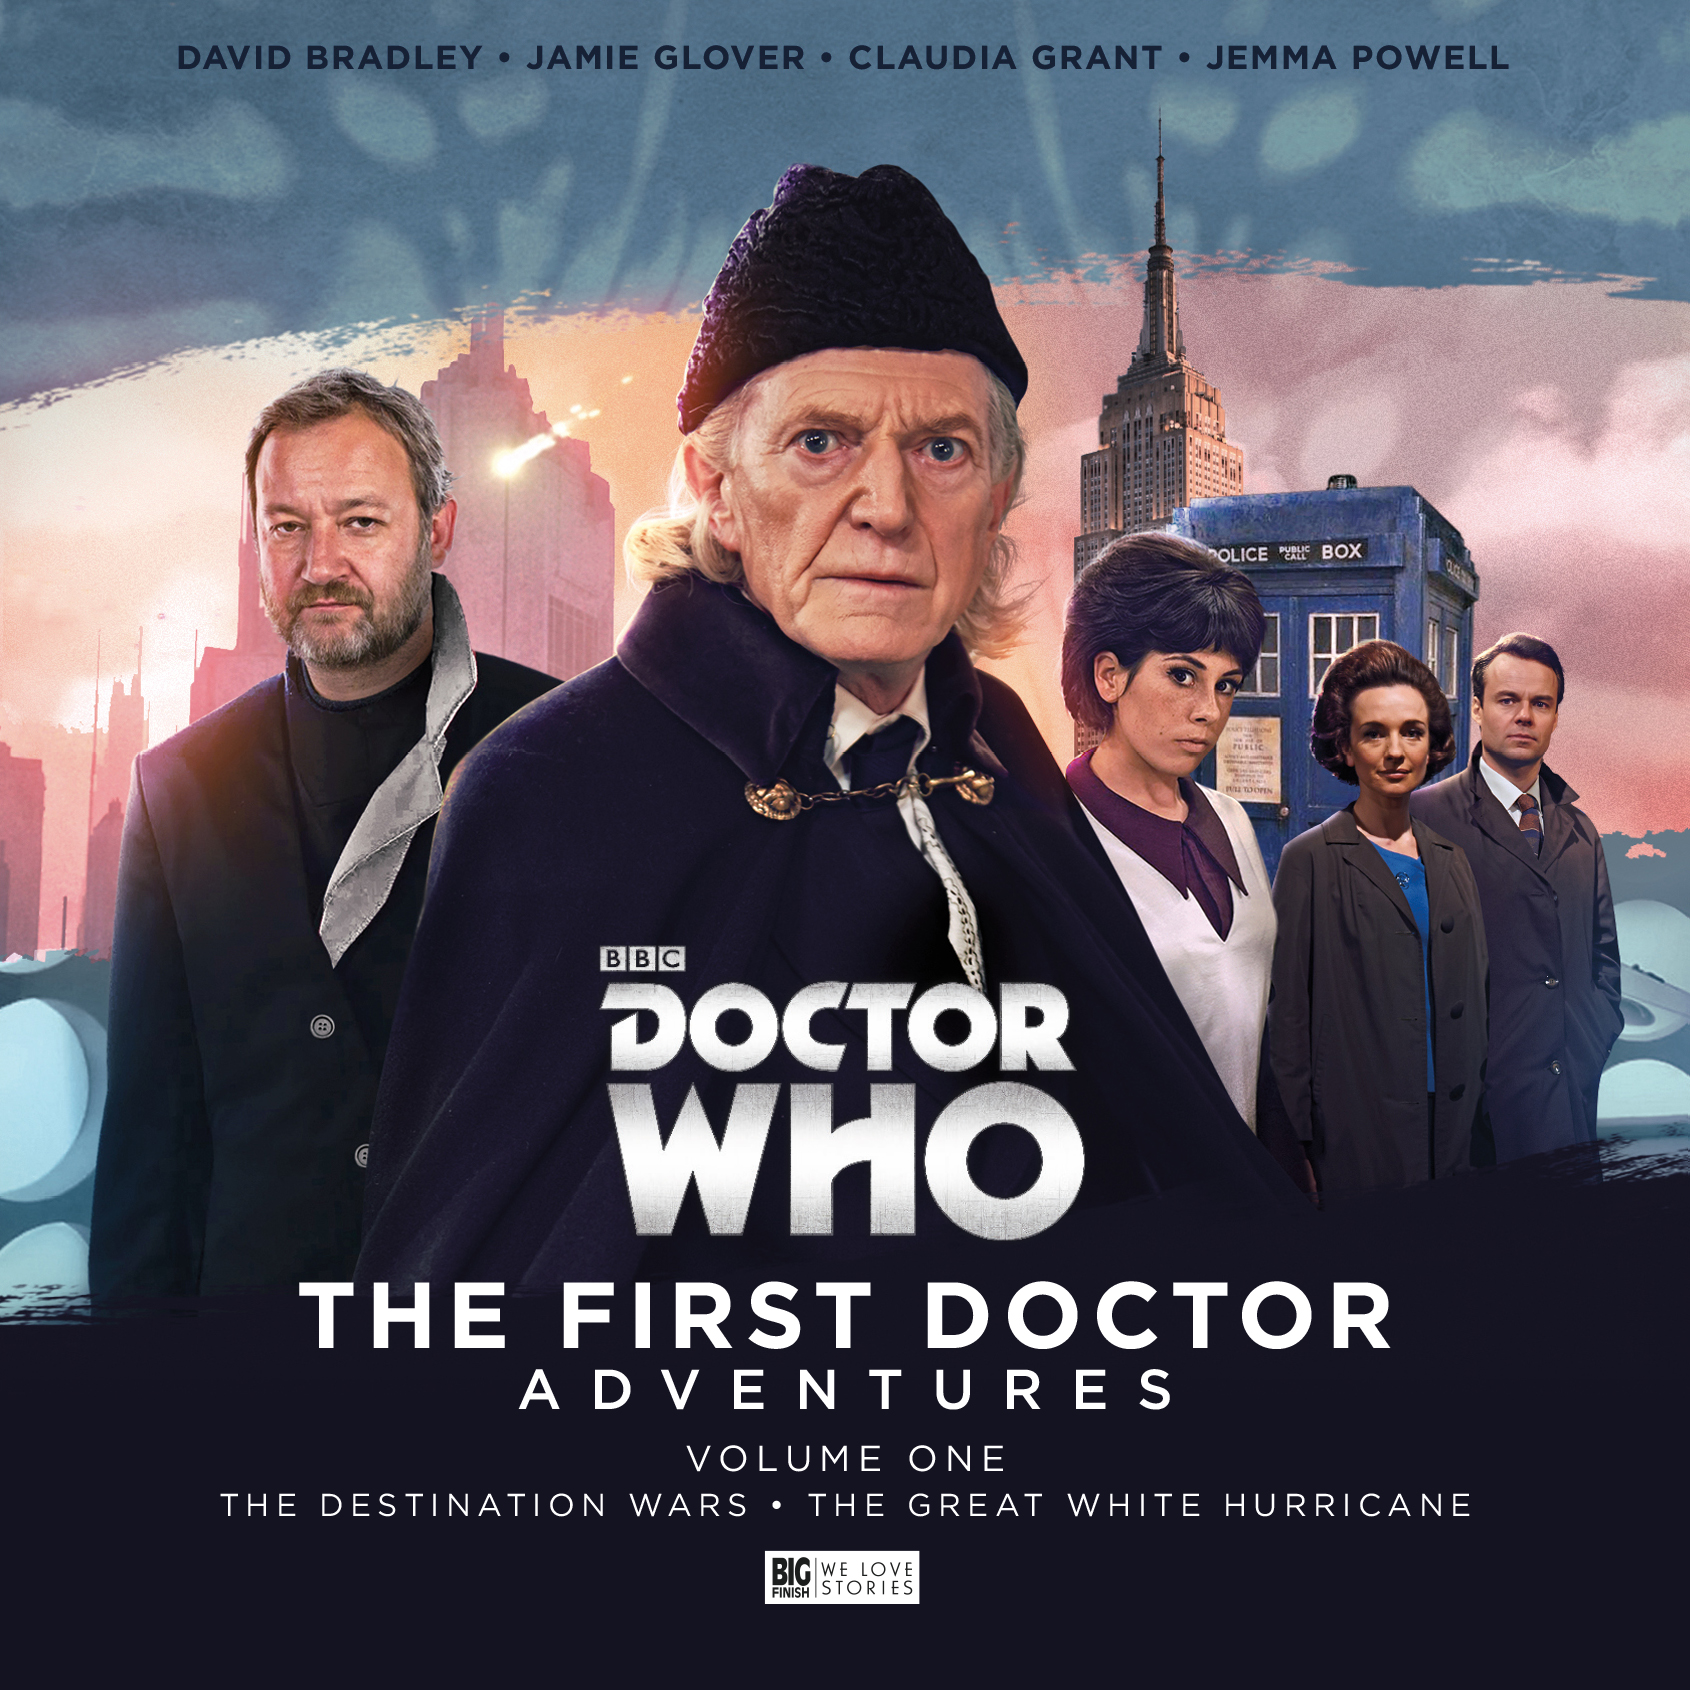 David Bradley Returns As Doctor Who’s First Doctor For His Own Audio Adventures